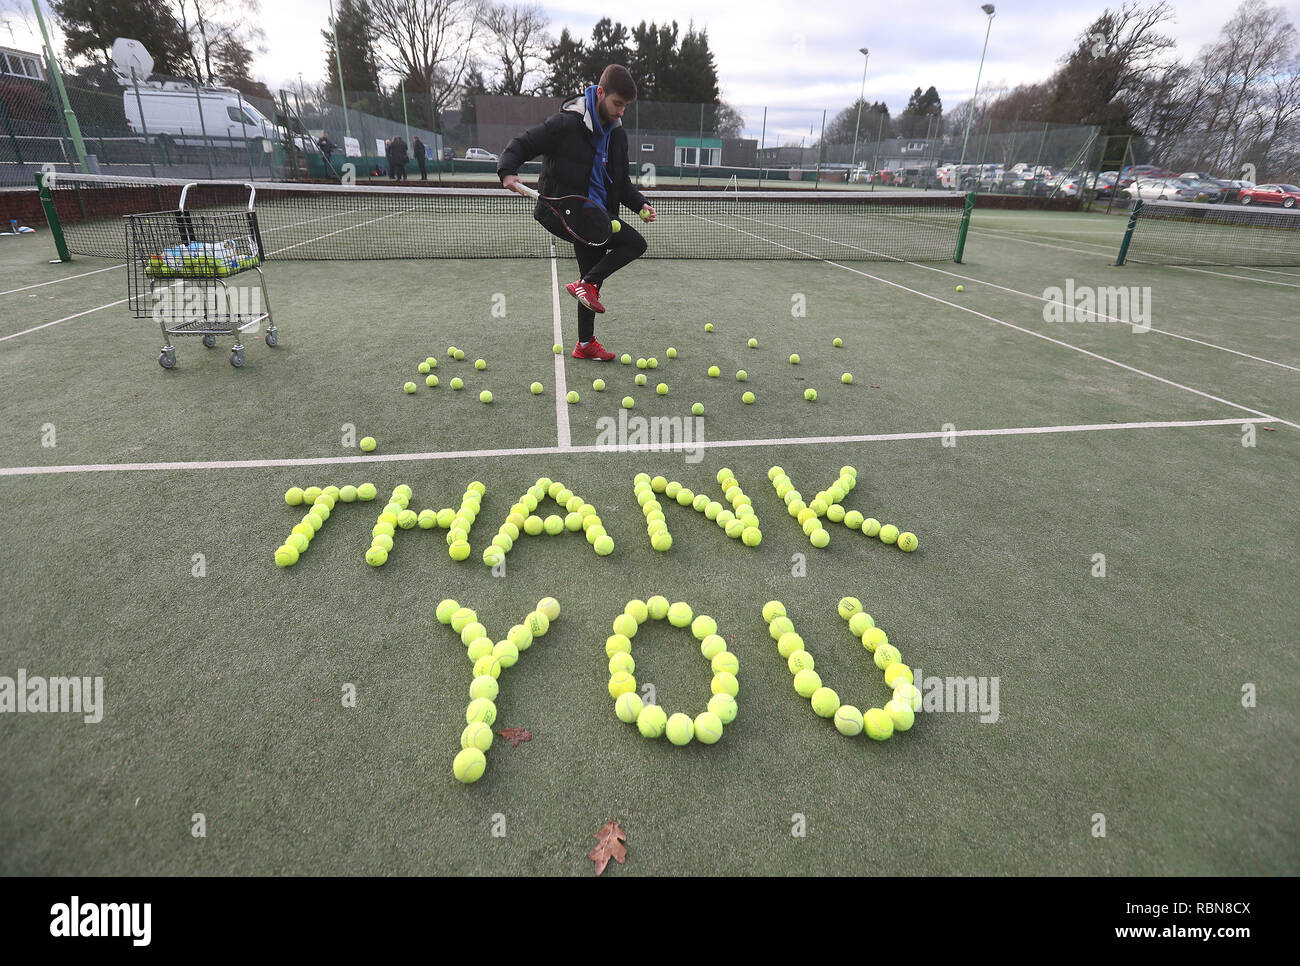 Tennis coach Josh Thomson with tennis balls laid out at Dunblane Tennis Club in Andy Murray's home town, he has said he is aiming to end his career after Wimbledon but the Australian Open may be his last tournament. Stock Photo